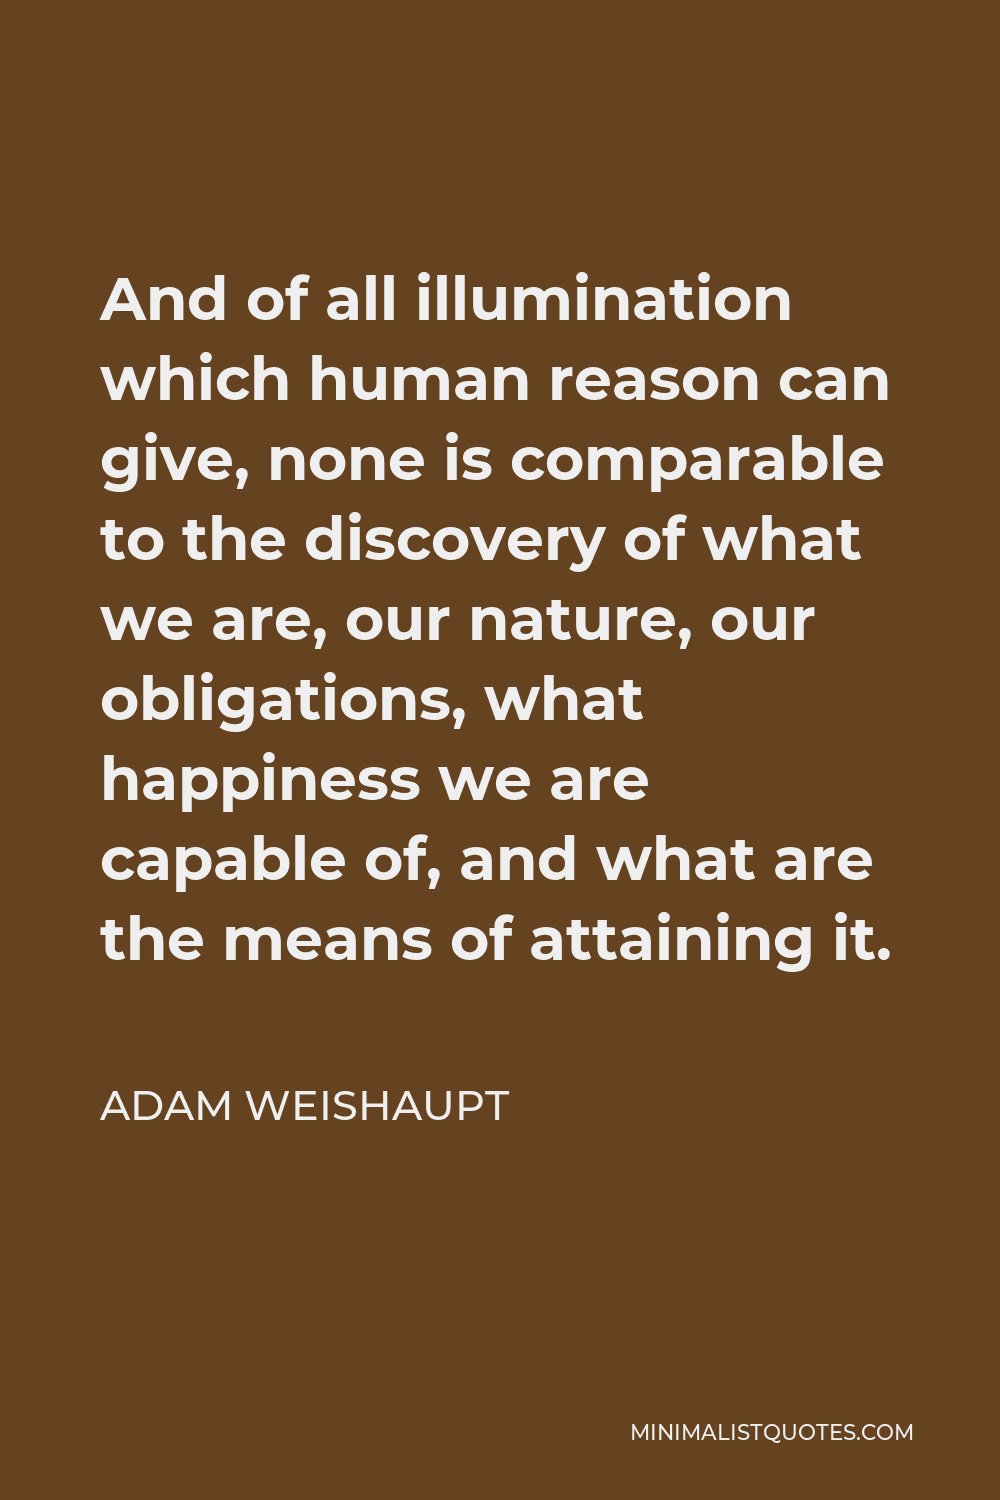 Adam Weishaupt Quote - And of all illumination which human reason can give, none is comparable to the discovery of what we are, our nature, our obligations, what happiness we are capable of, and what are the means of attaining it.